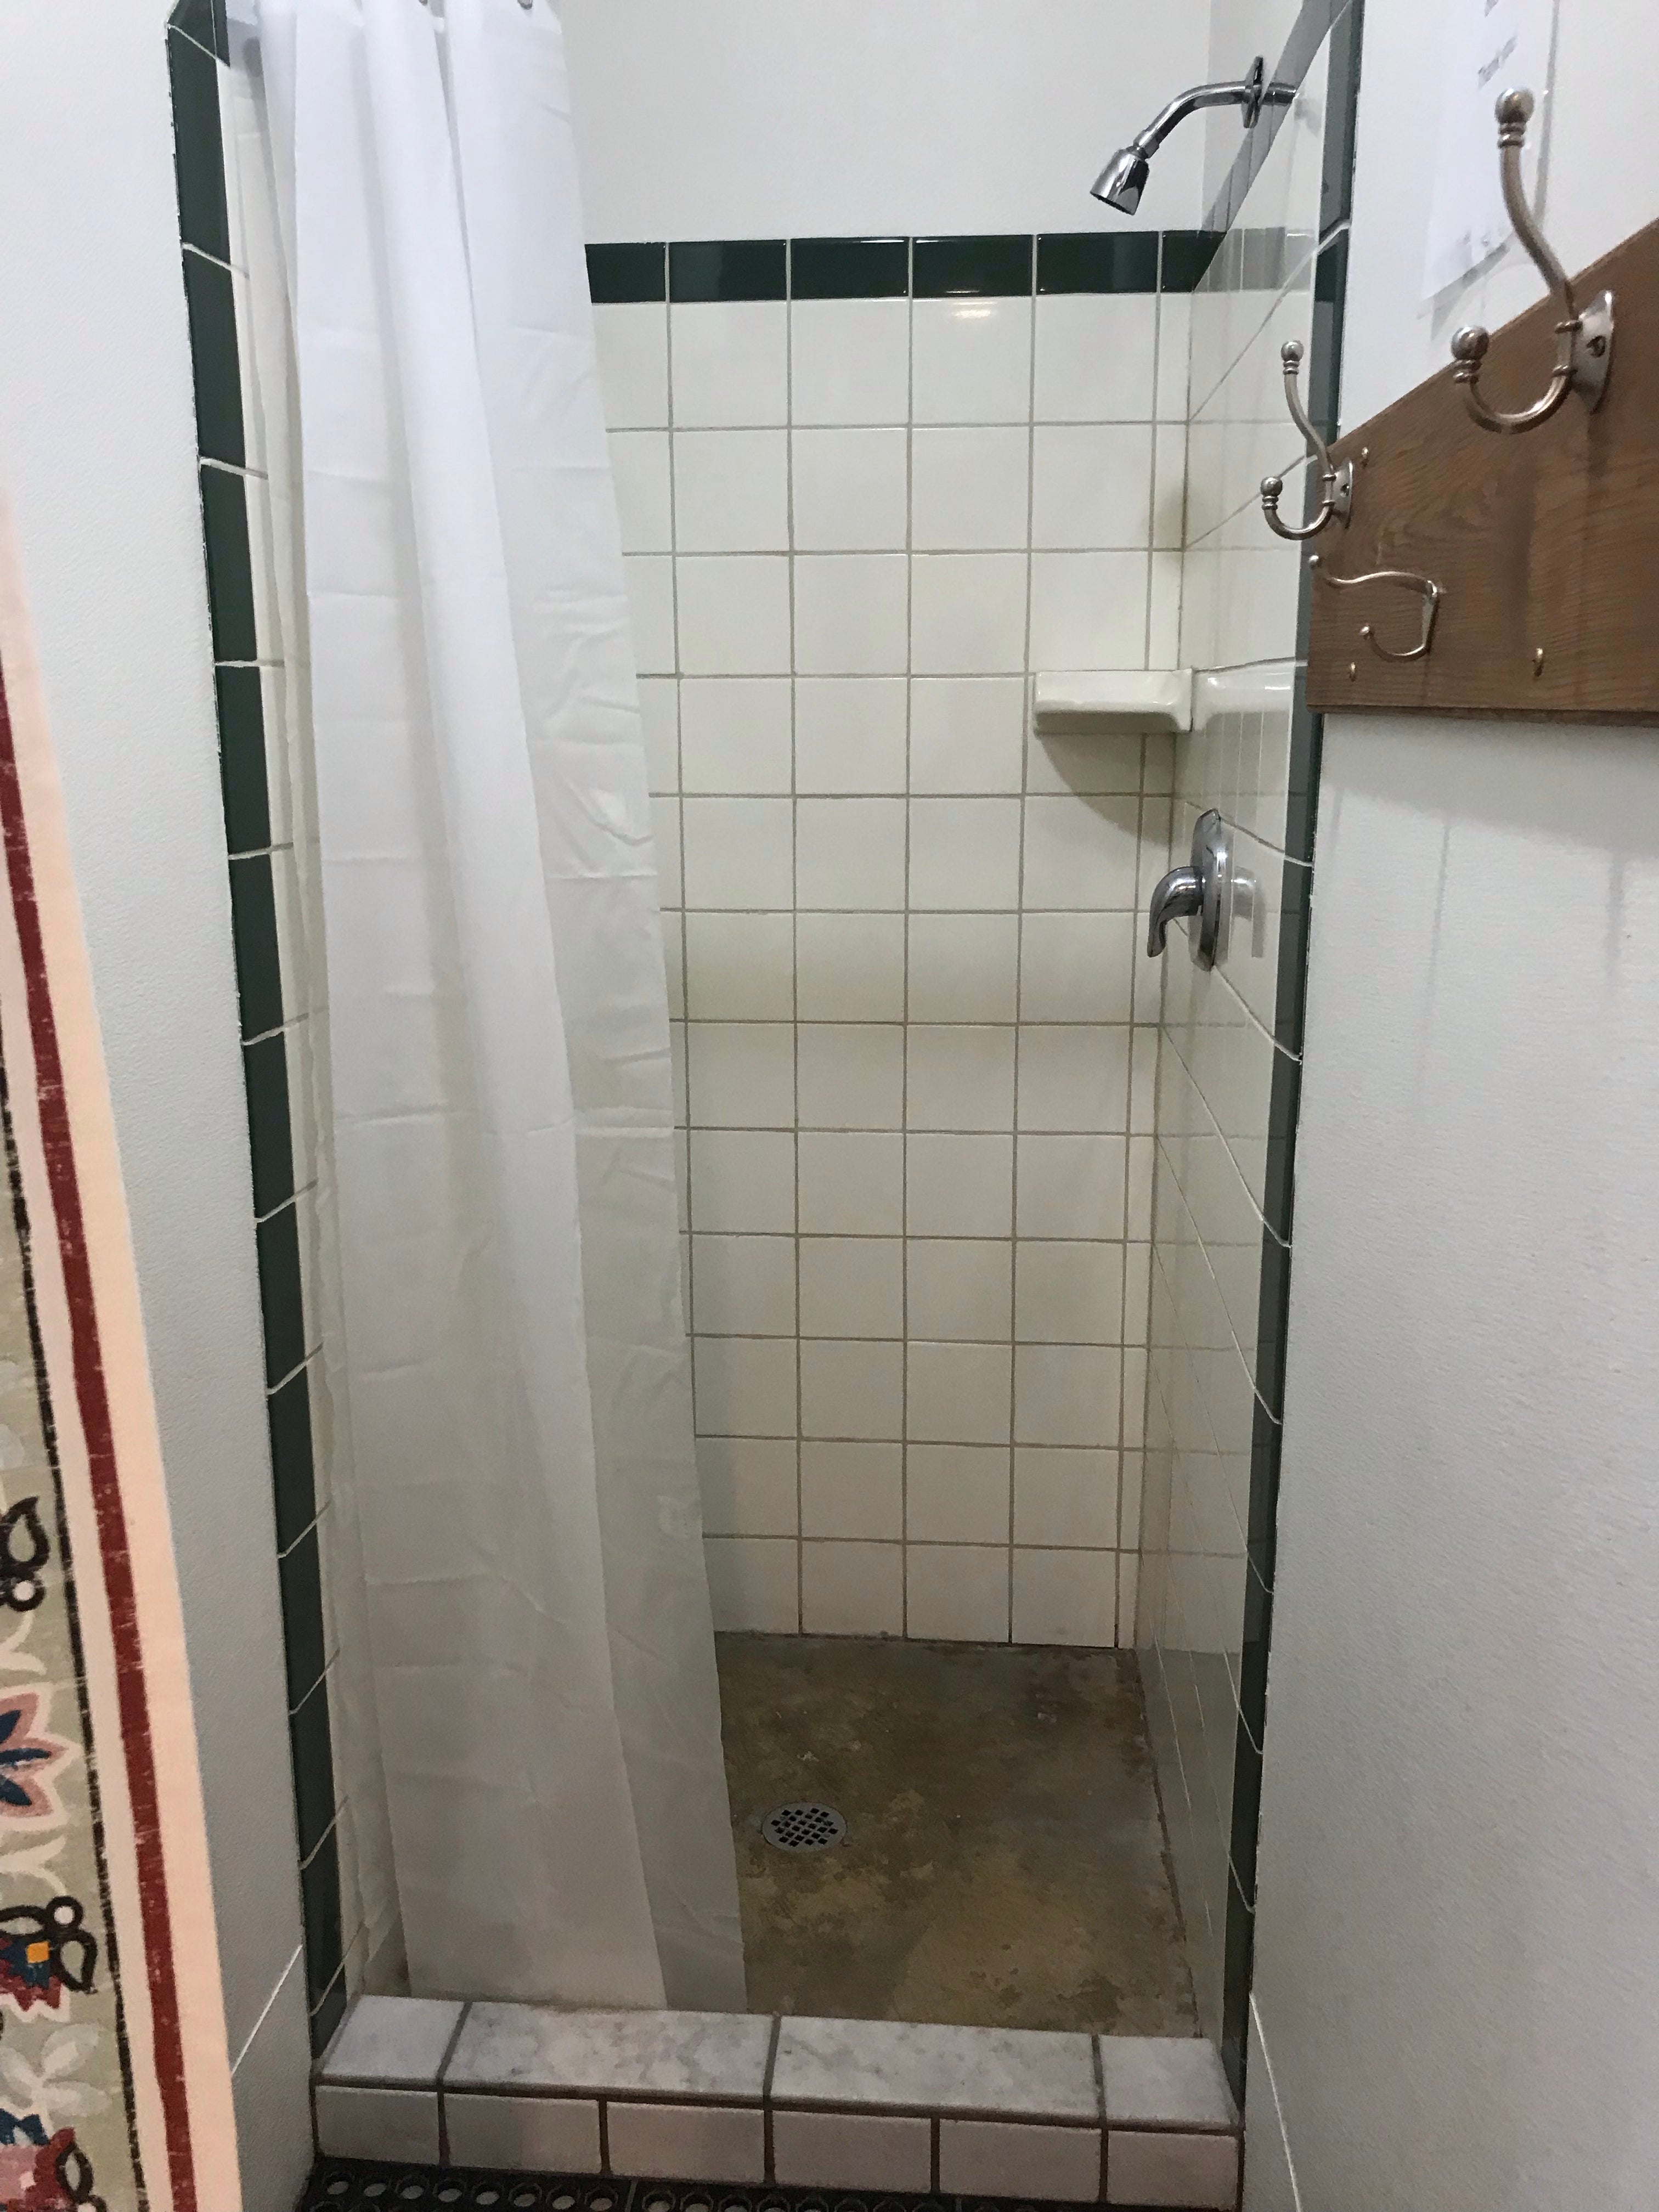 2 showers, one ada accessible